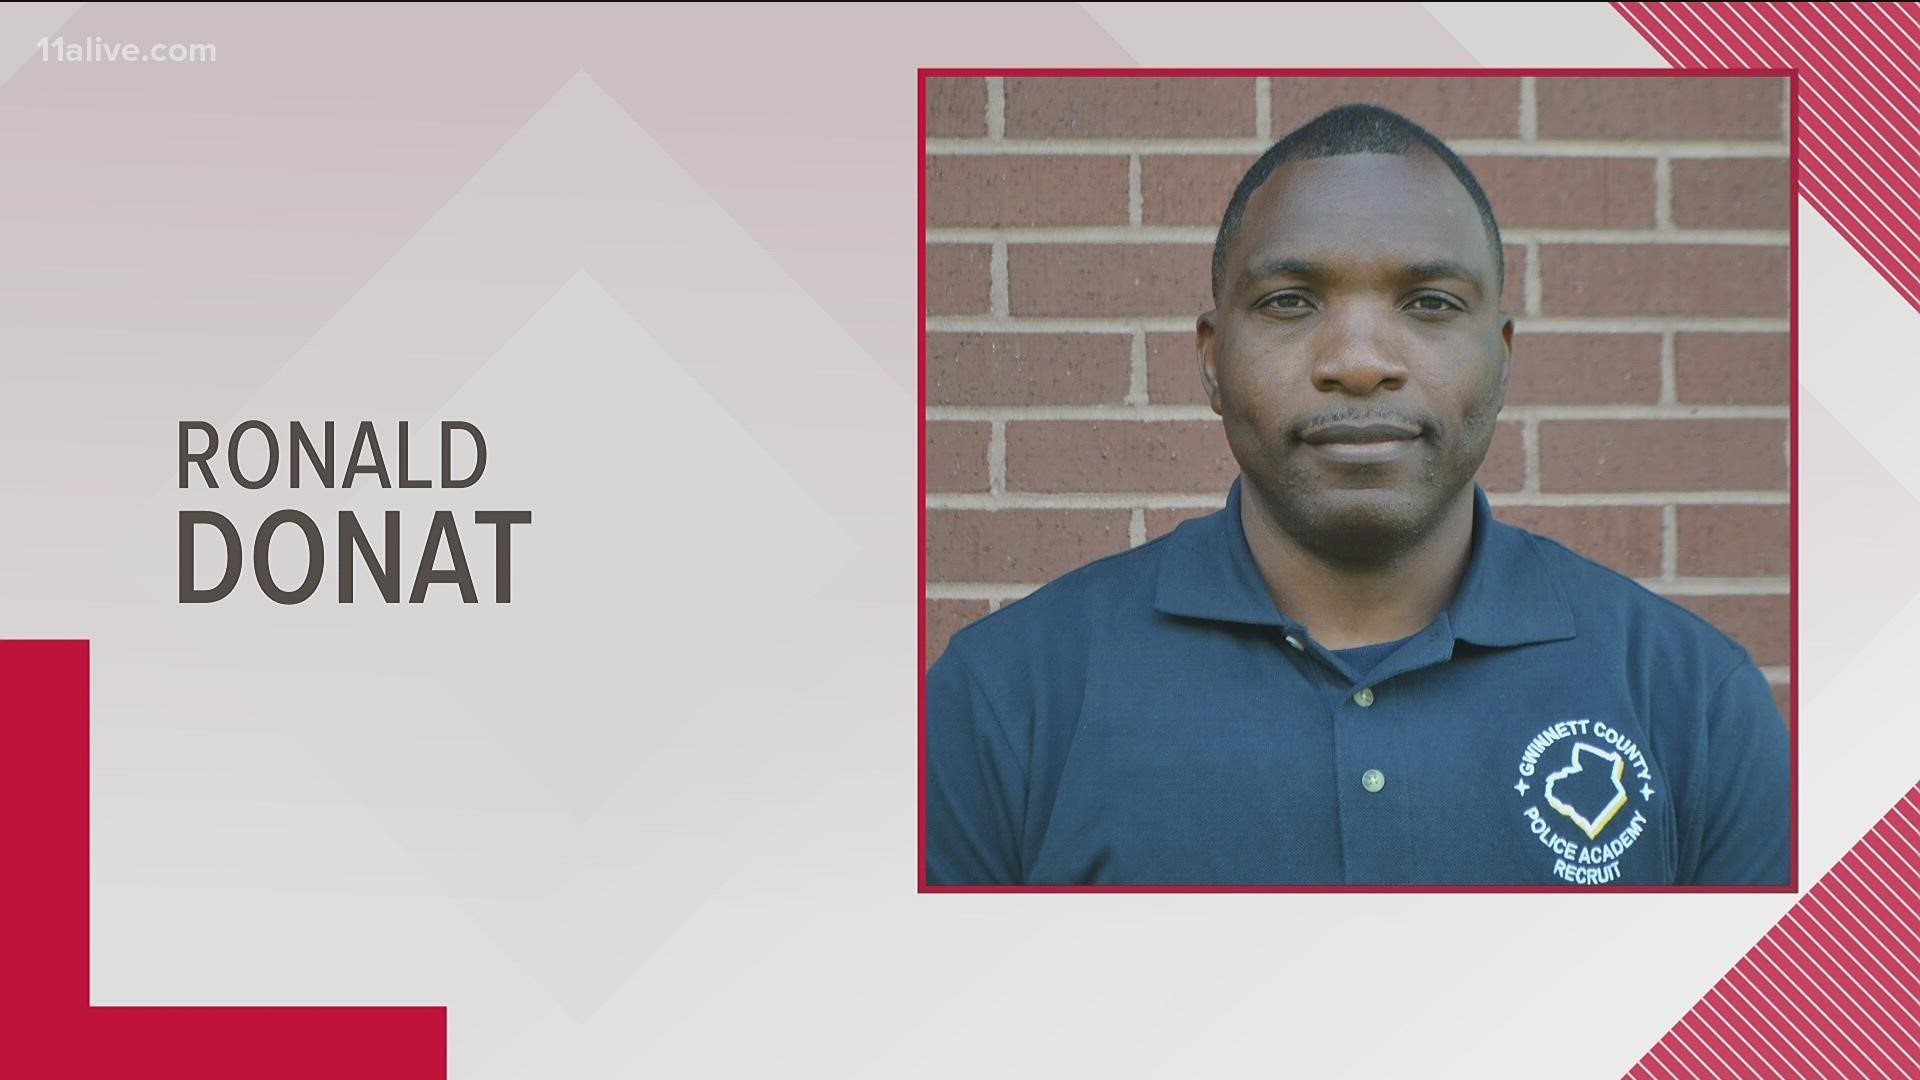 The Gwinnett County Police Department said Ronald Donat was part of the 112th training academy.